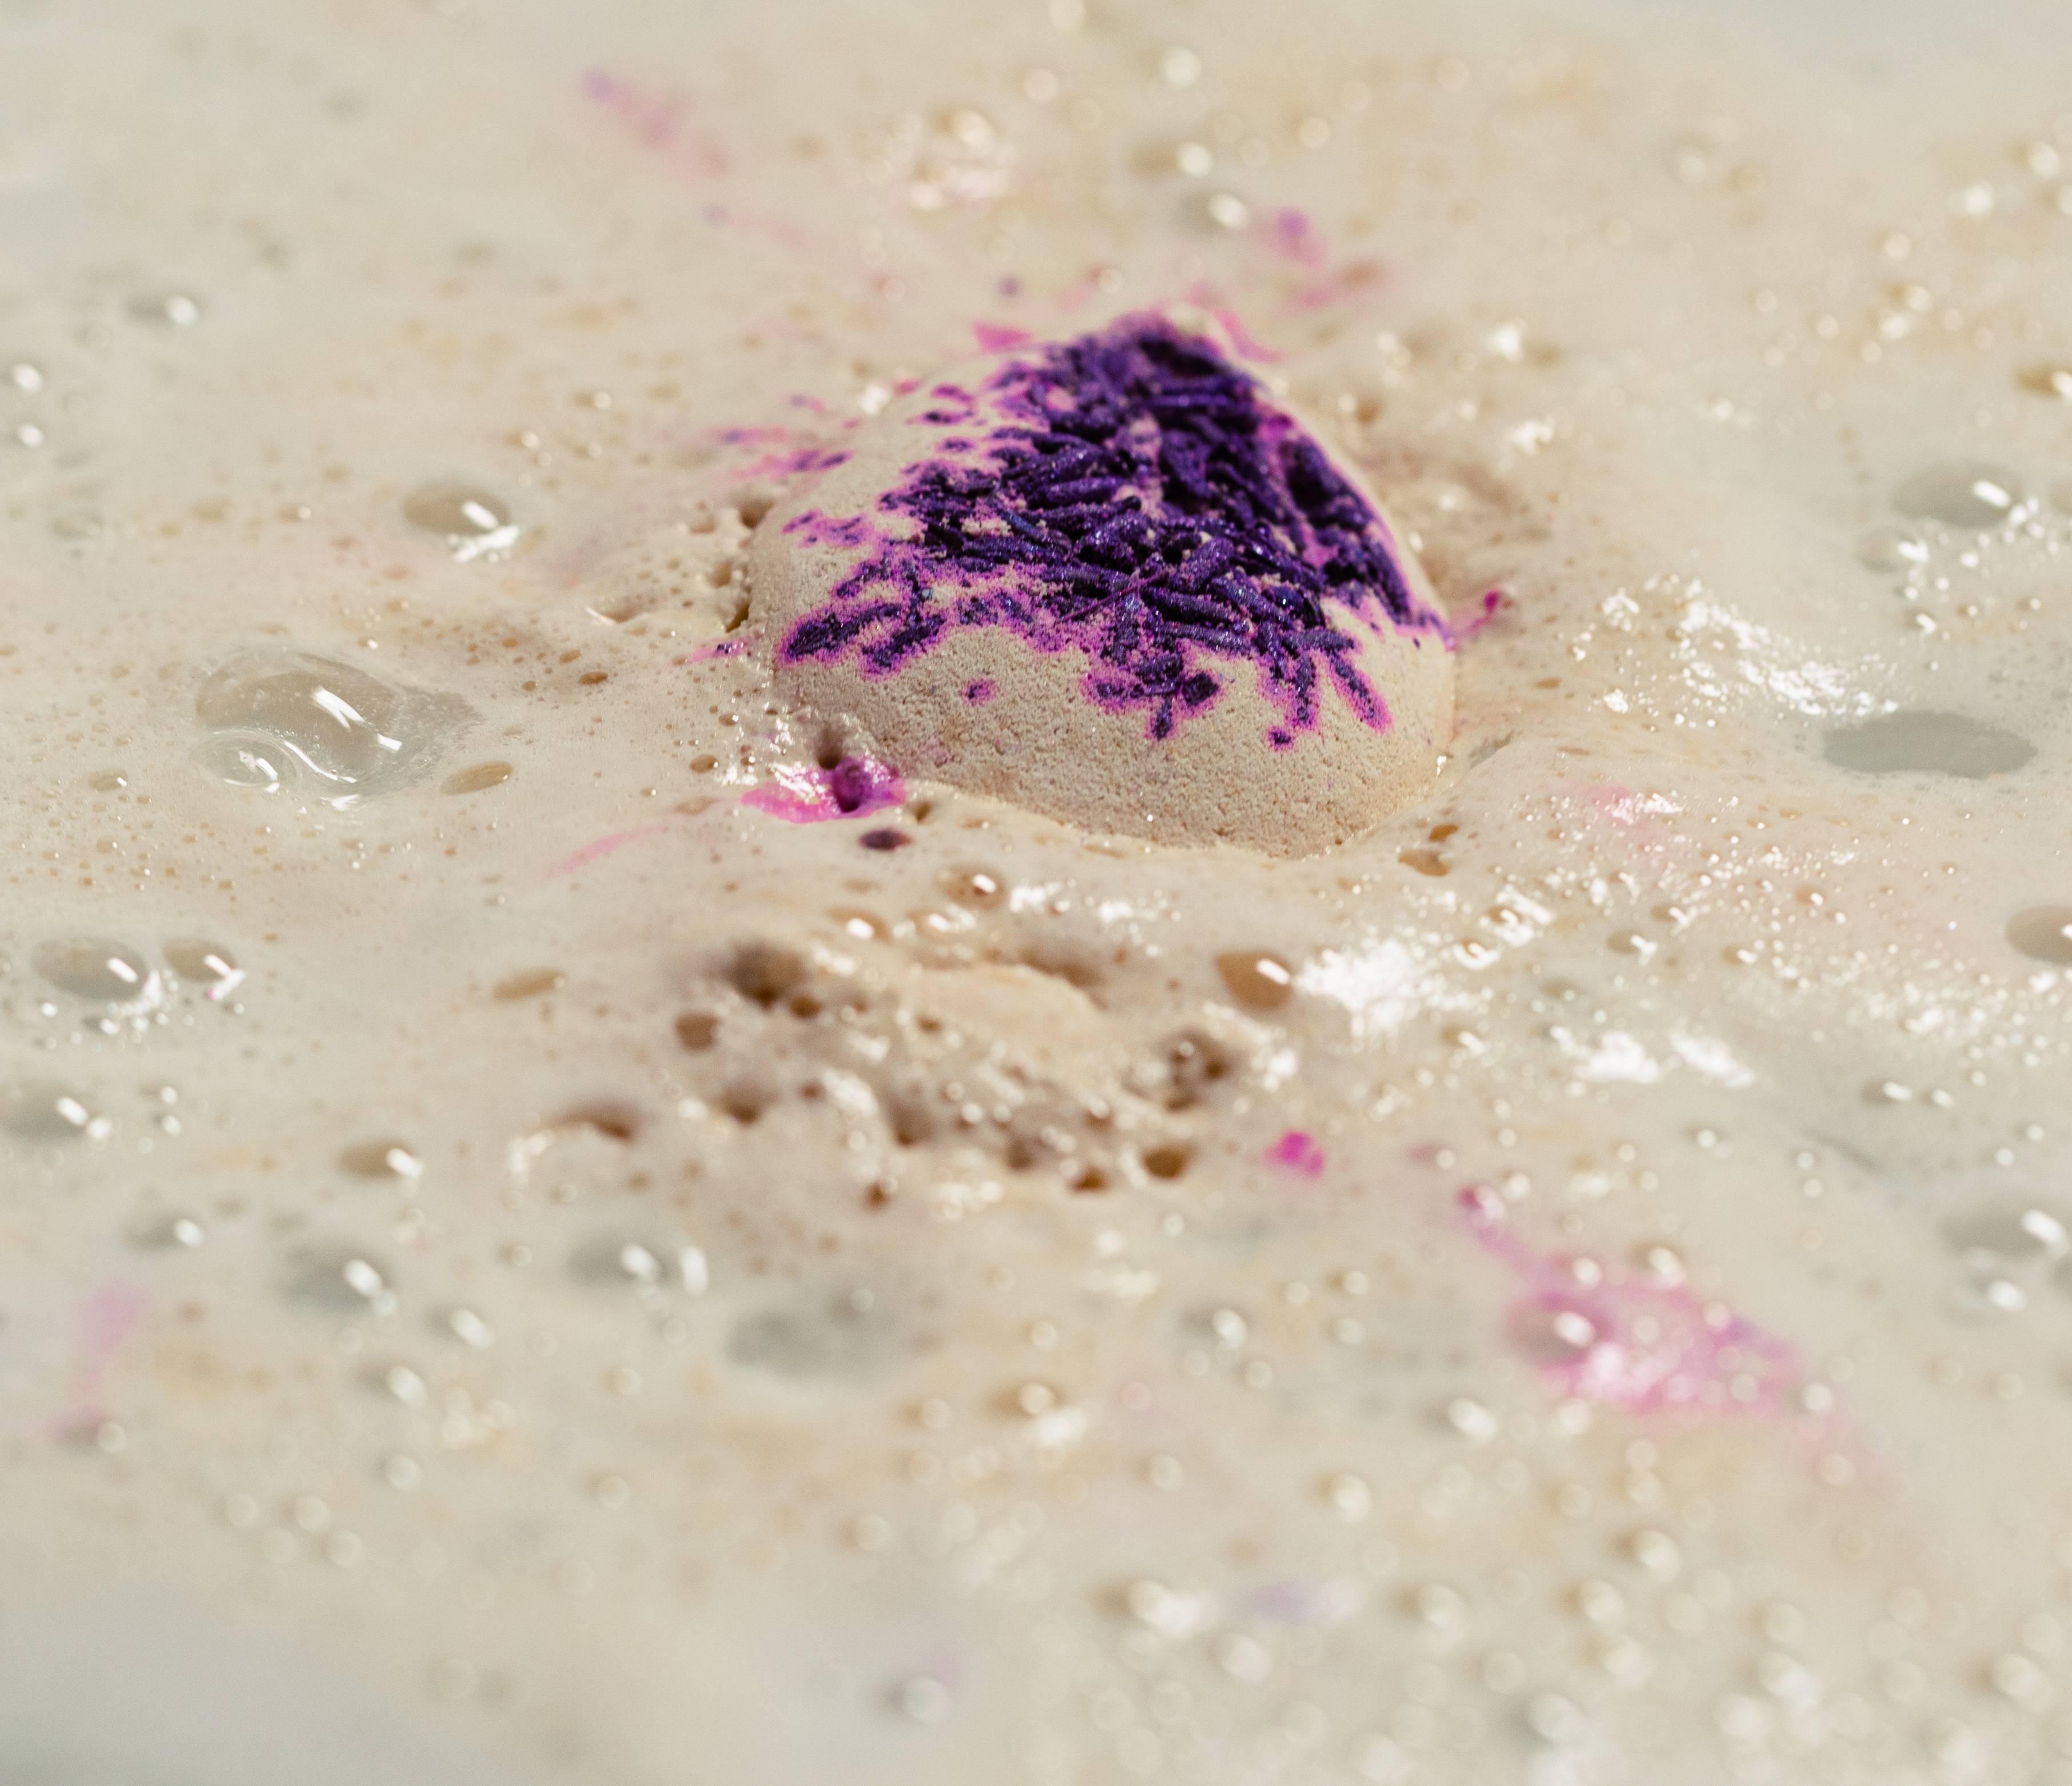 Image shows the Sleep Bear bath bomb nearly dissolved with small flecks of purple and lavender flowers sit on top.